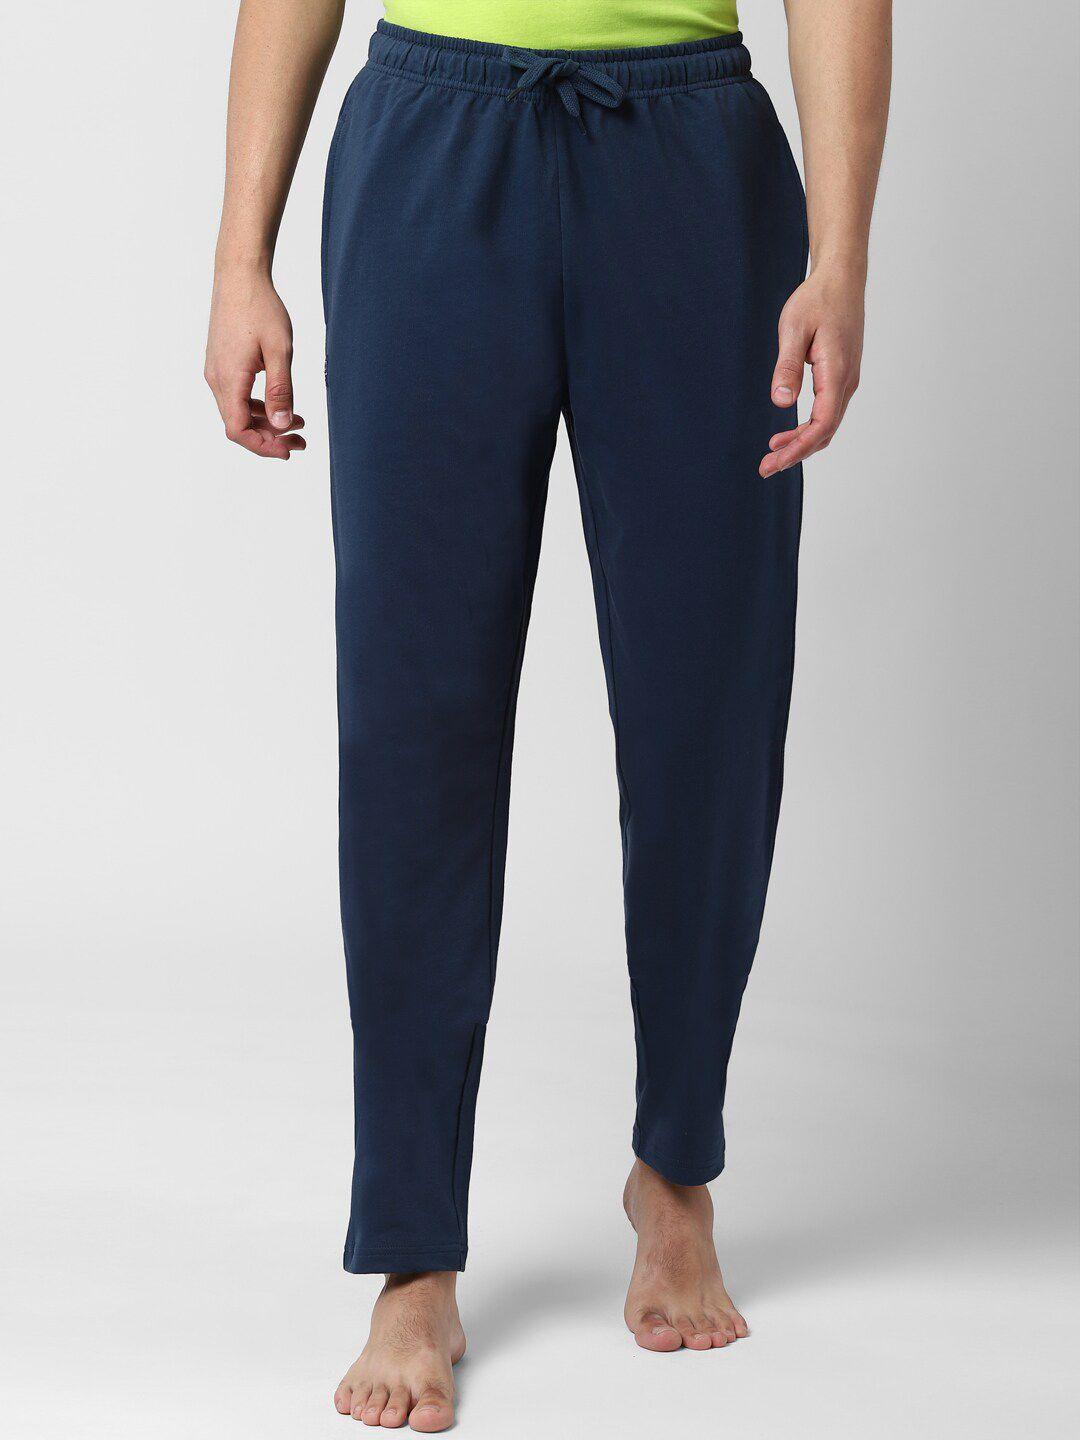 peter-england-men-navy-blue-solid-cotton-straight-lounge-pants